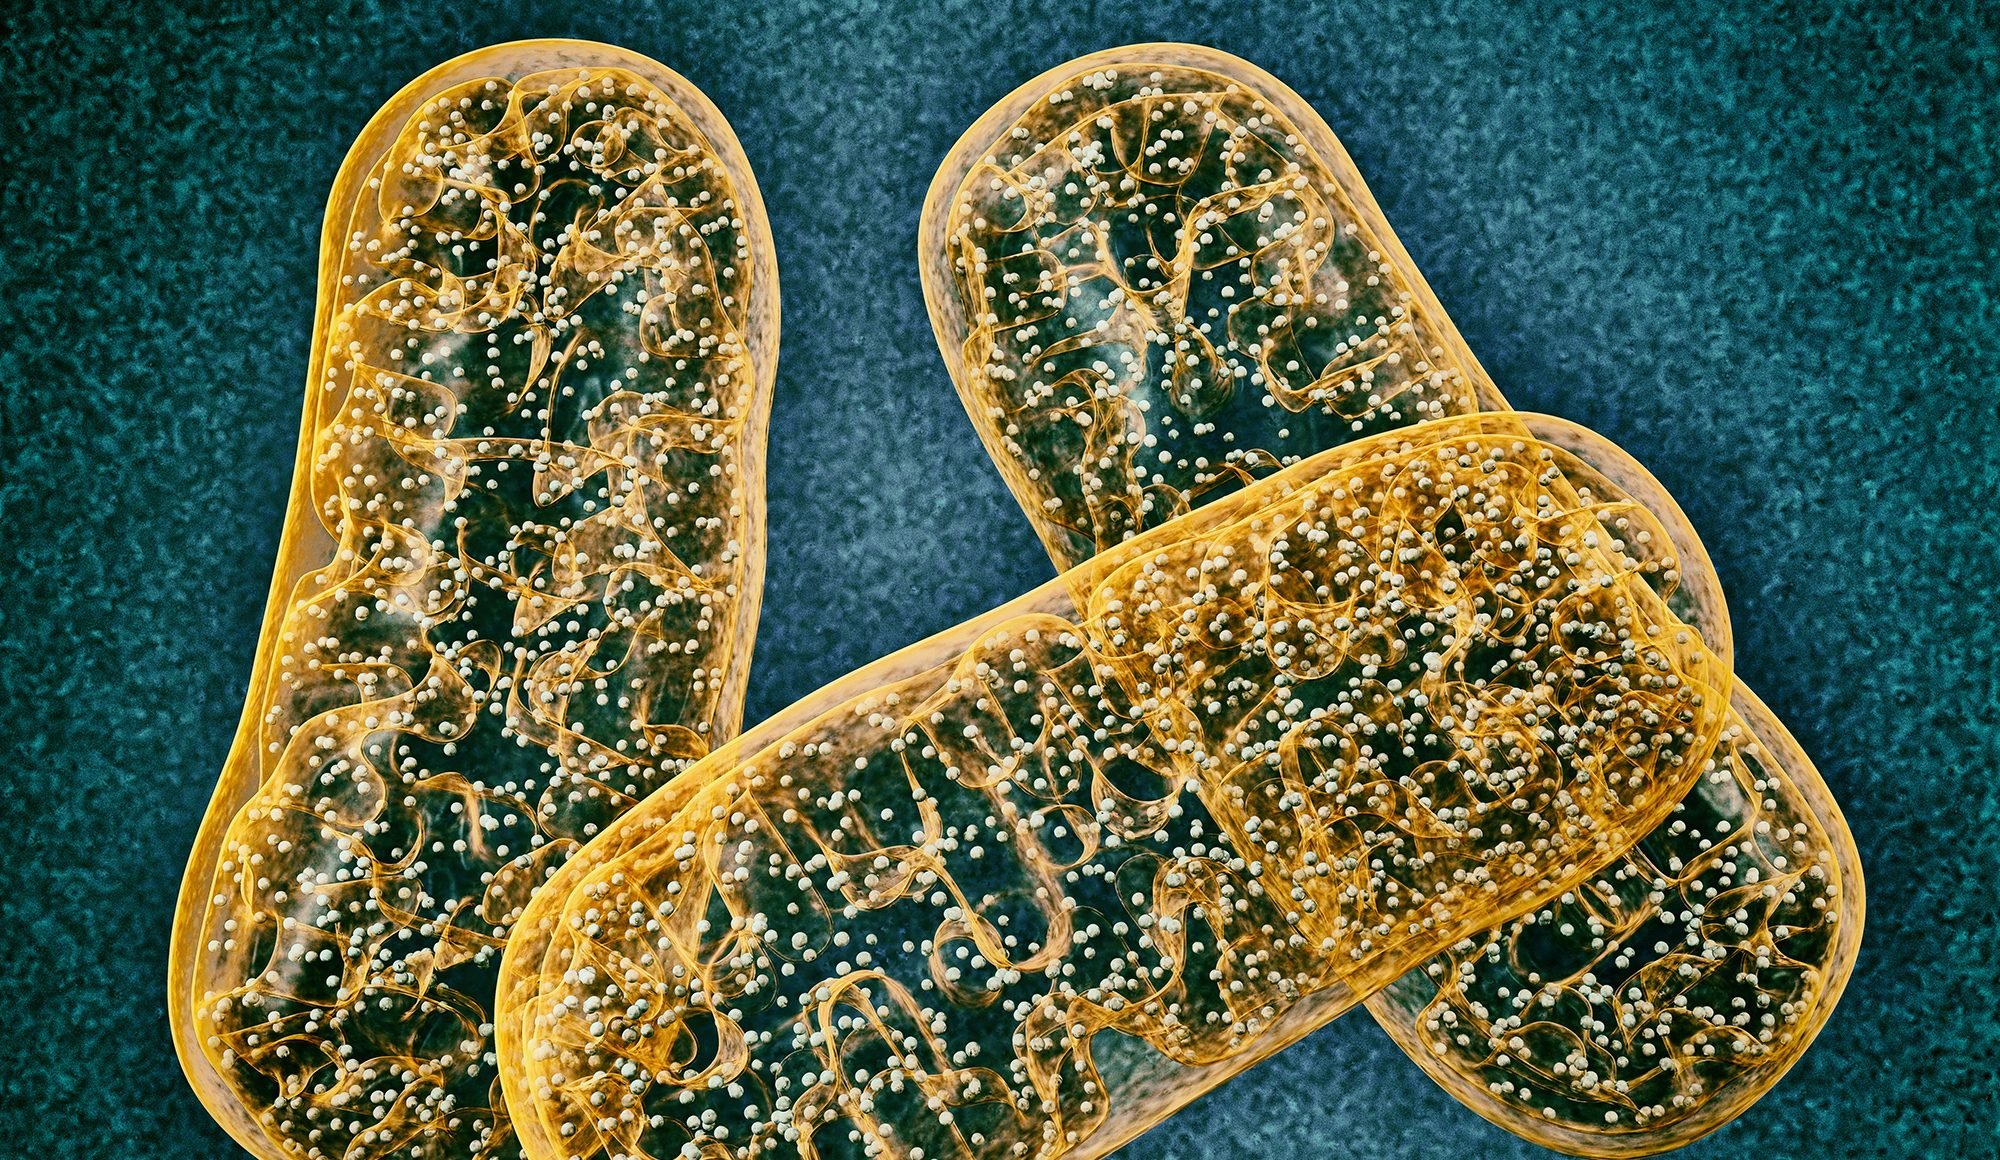 Mitochondrial Dysfunction May Be a Cause of Age-Related Cognitive Impairment